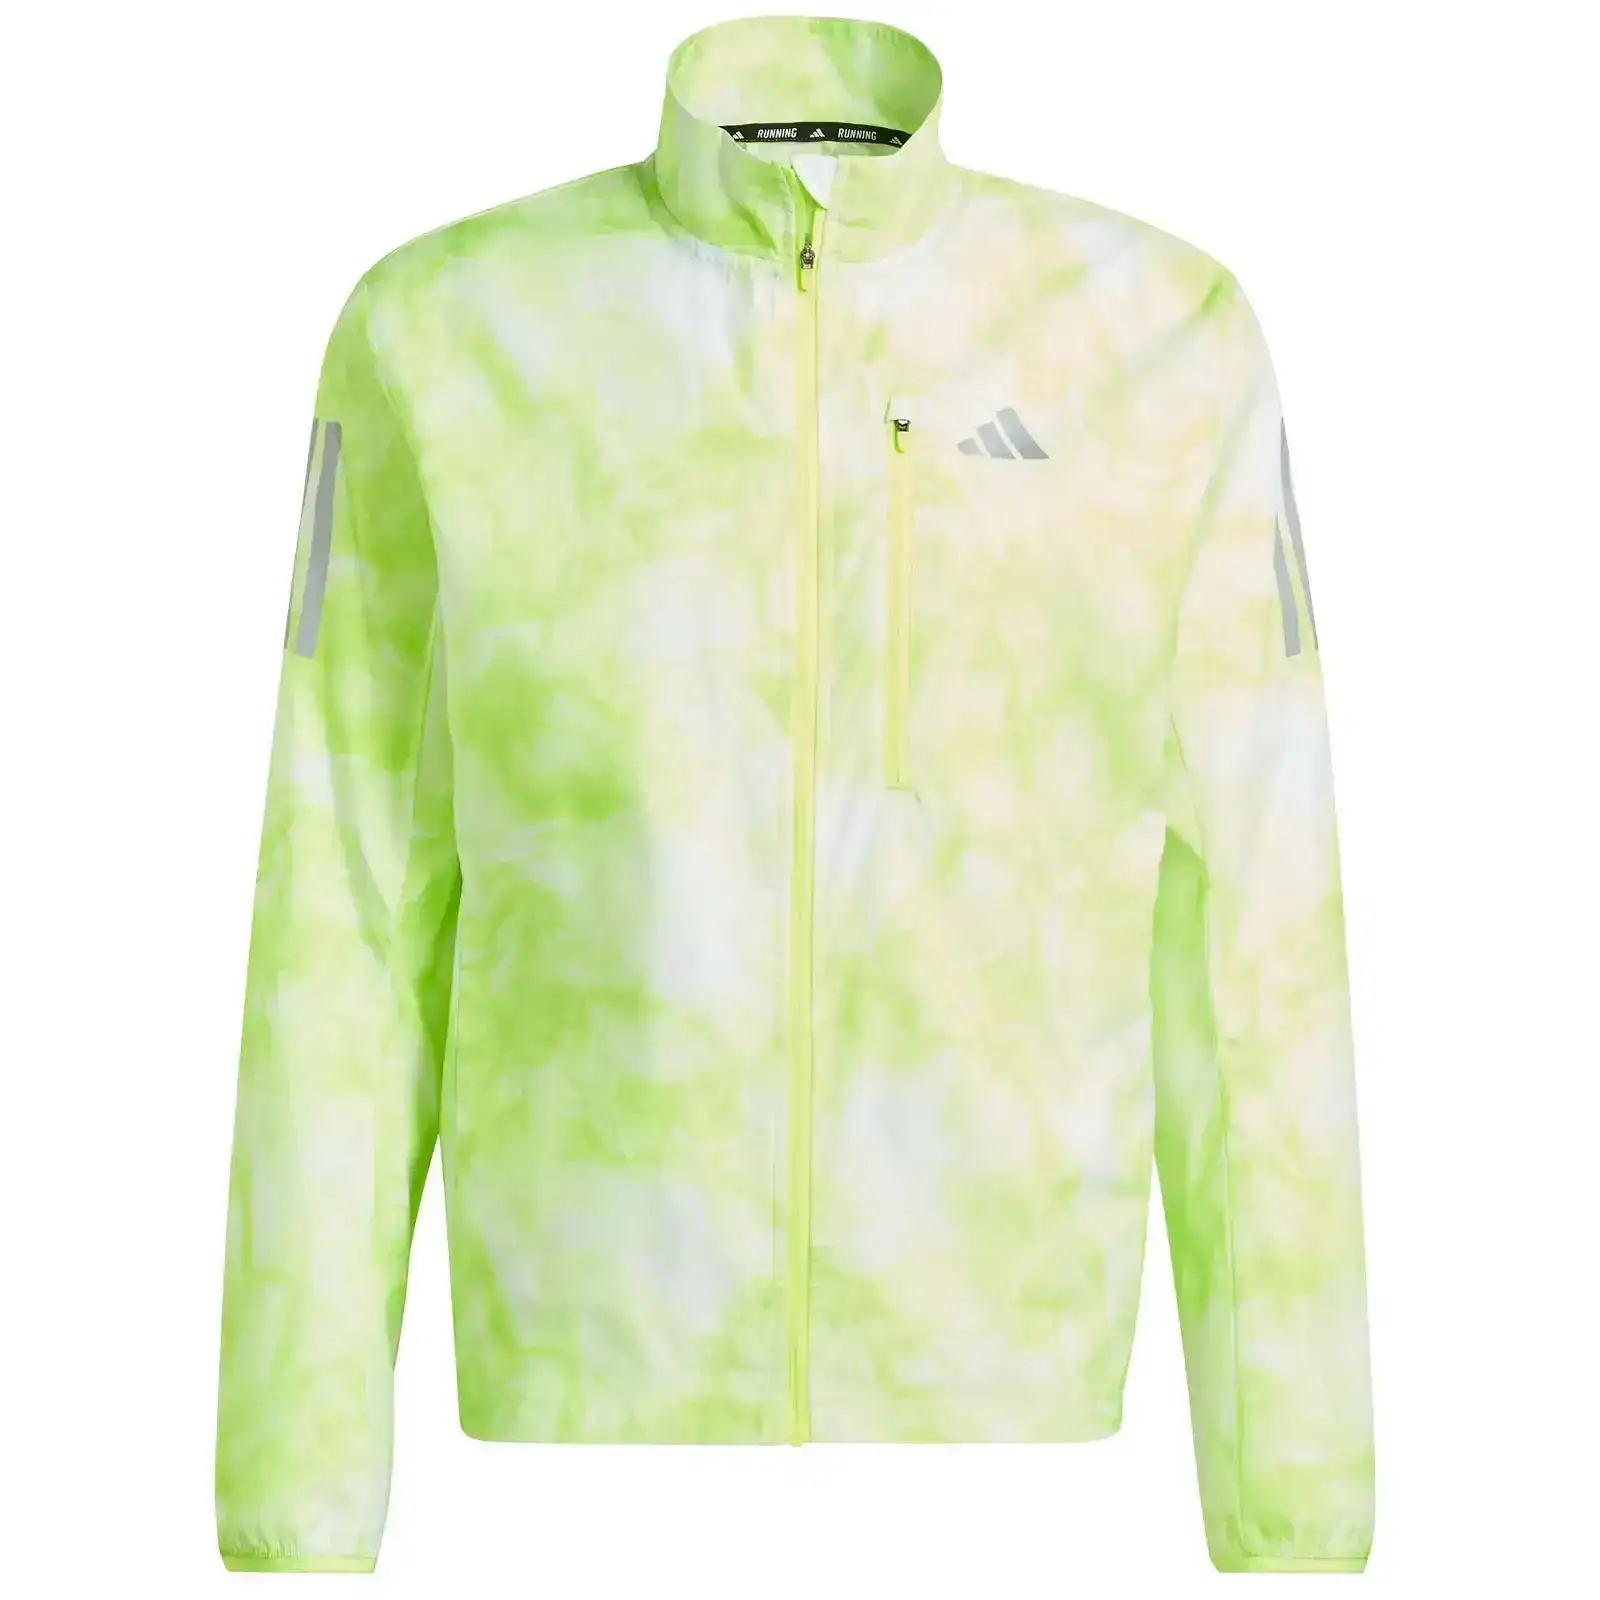 Image of adidas Own the Run Allover Print Mens Jacket